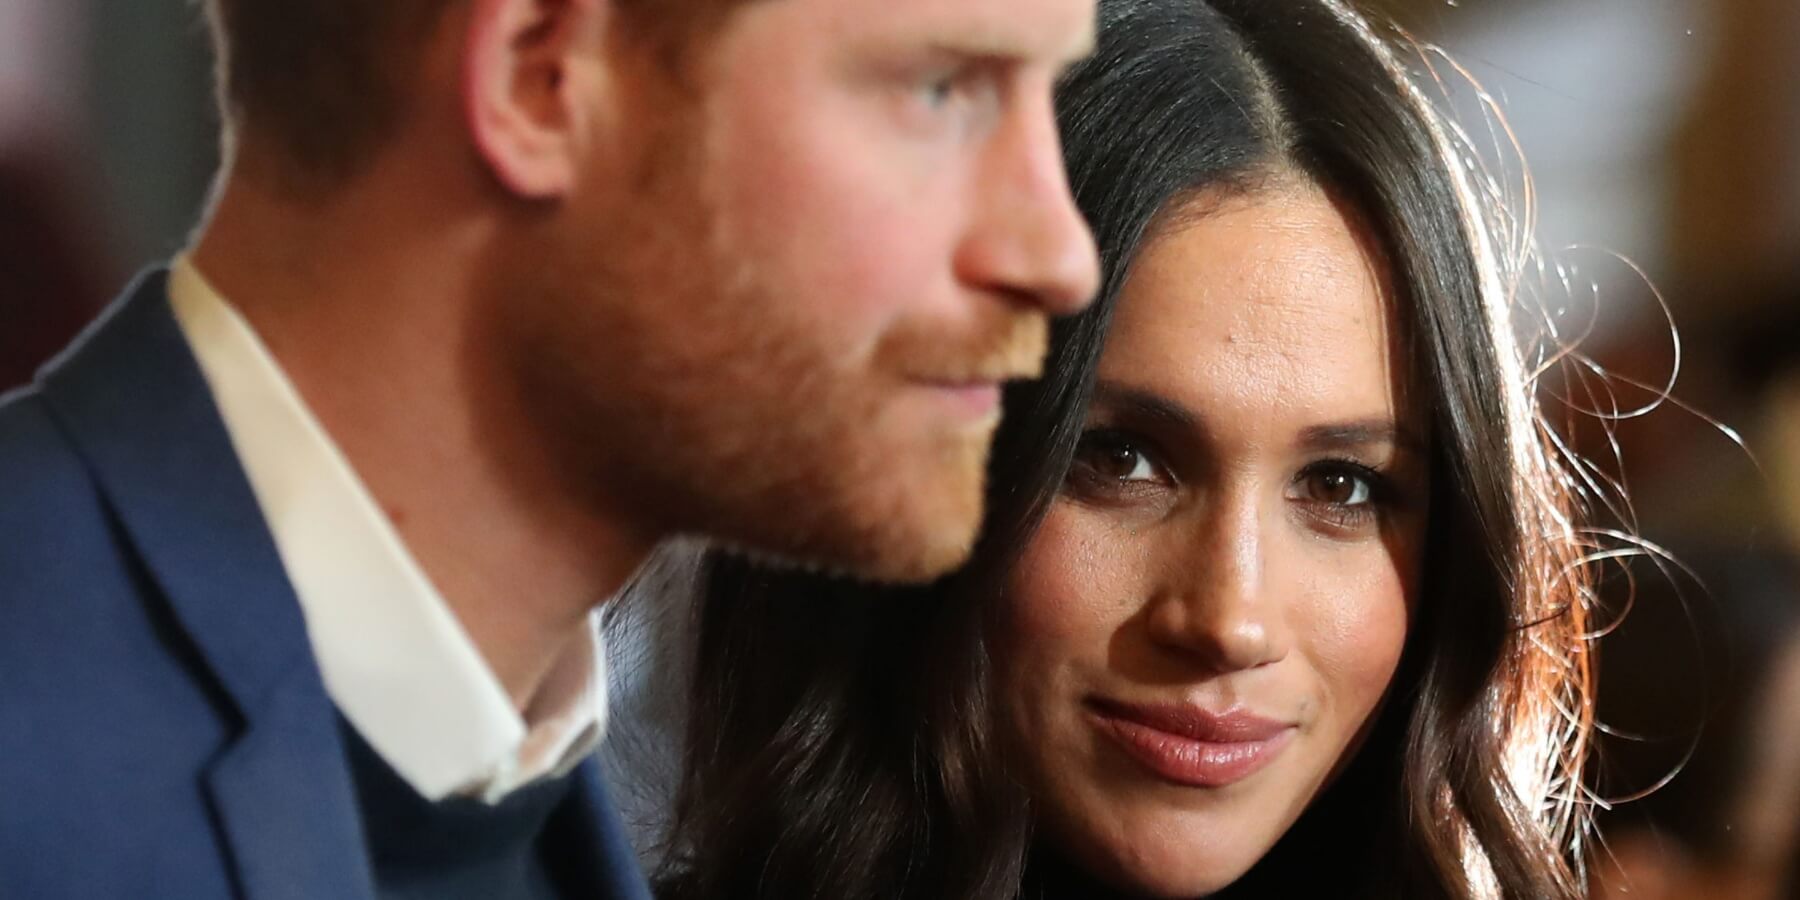 Prince Harry and Meghan Markle photographed as working royals in 2018